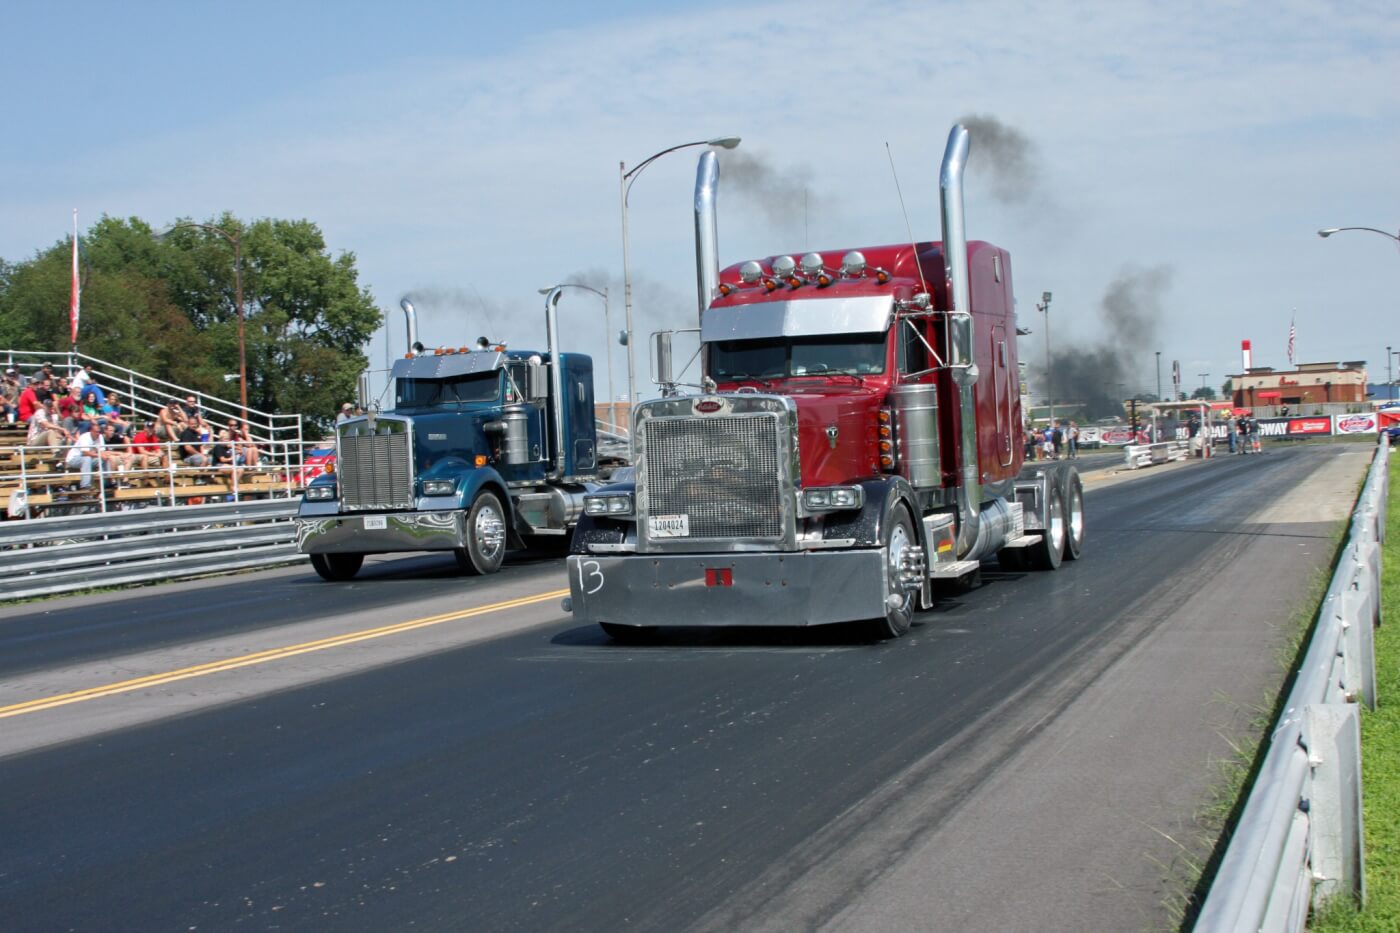 Robby Patterson and his maroon Peterbilt took the win Sunday over Josh Hubbard and his blue Kenworth in the Big Rig class.